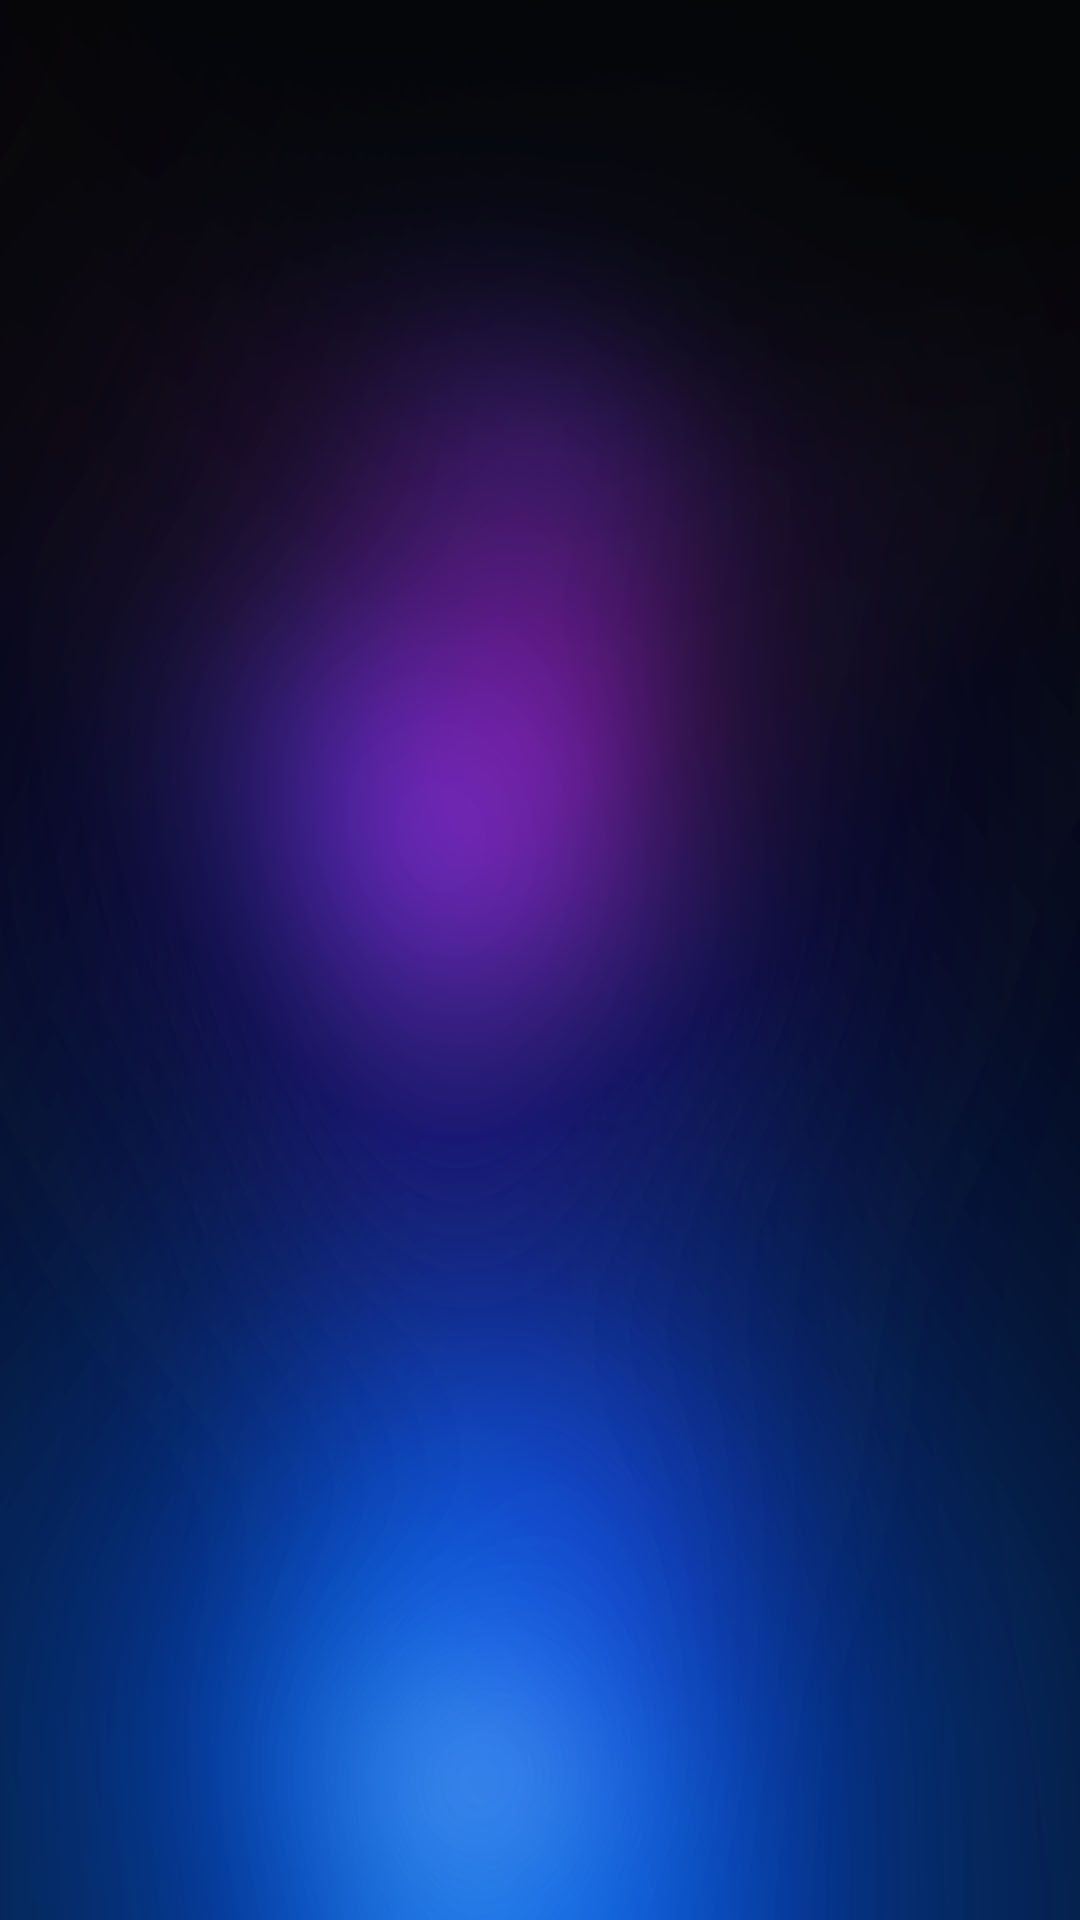 1080x Purple Blue Gradient Samsung Android Wallpaper Wallpaper 4k Android